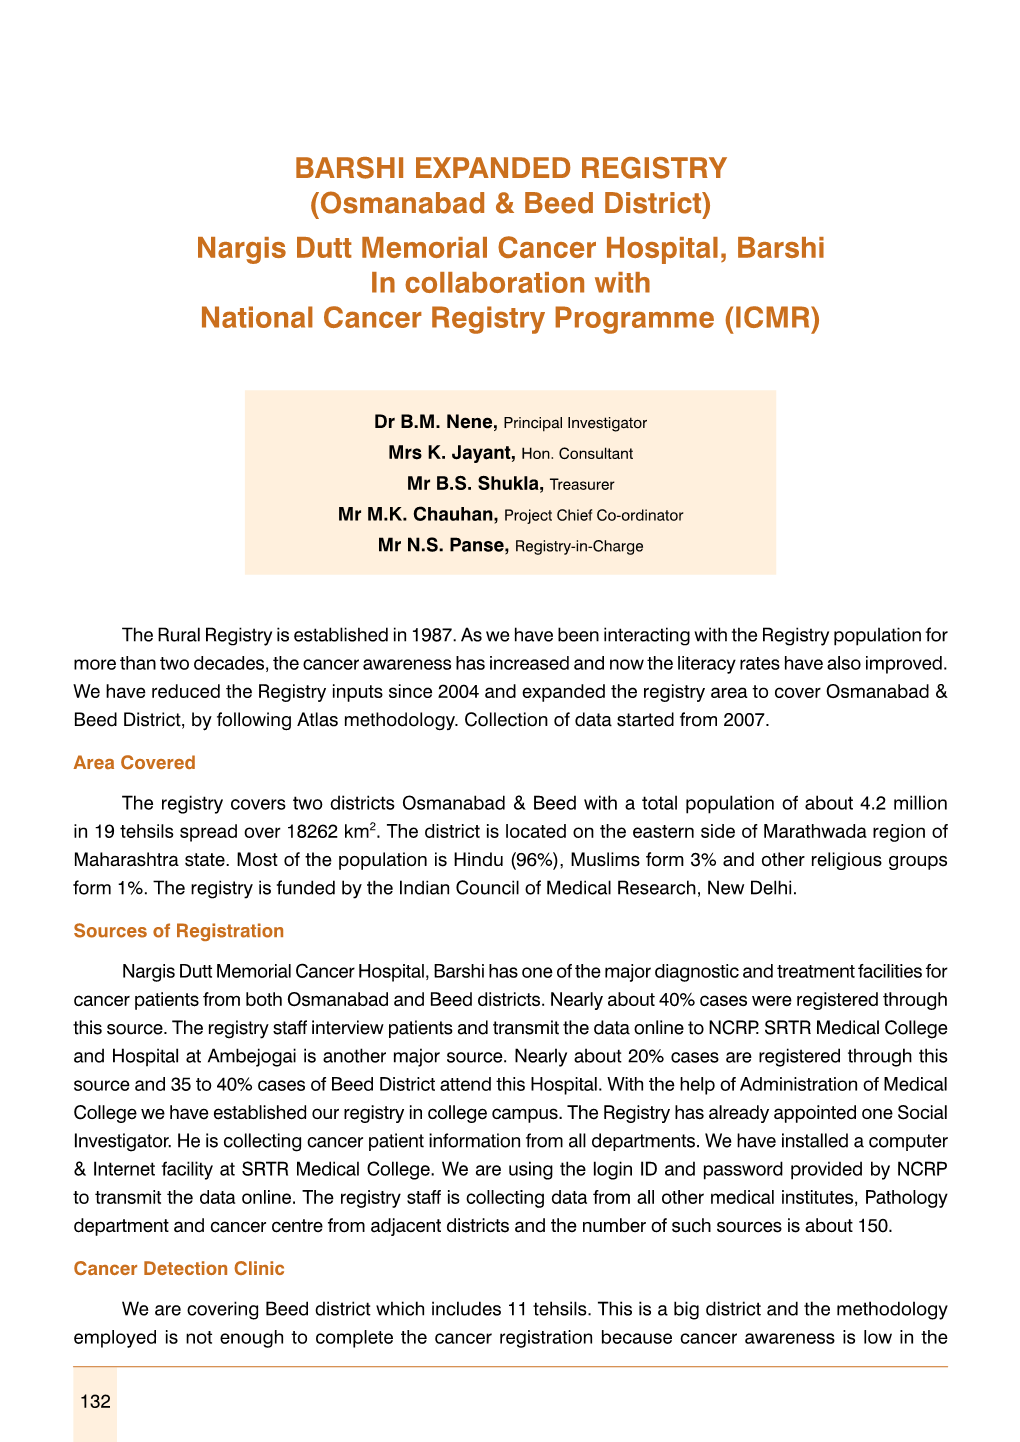 Barshi Expanded Registry (Osmanabad & Beed District) Nargis Dutt Memorial Cancer Hospital, Barshi in Collaboration with National Cancer Registry Programme (ICMR)